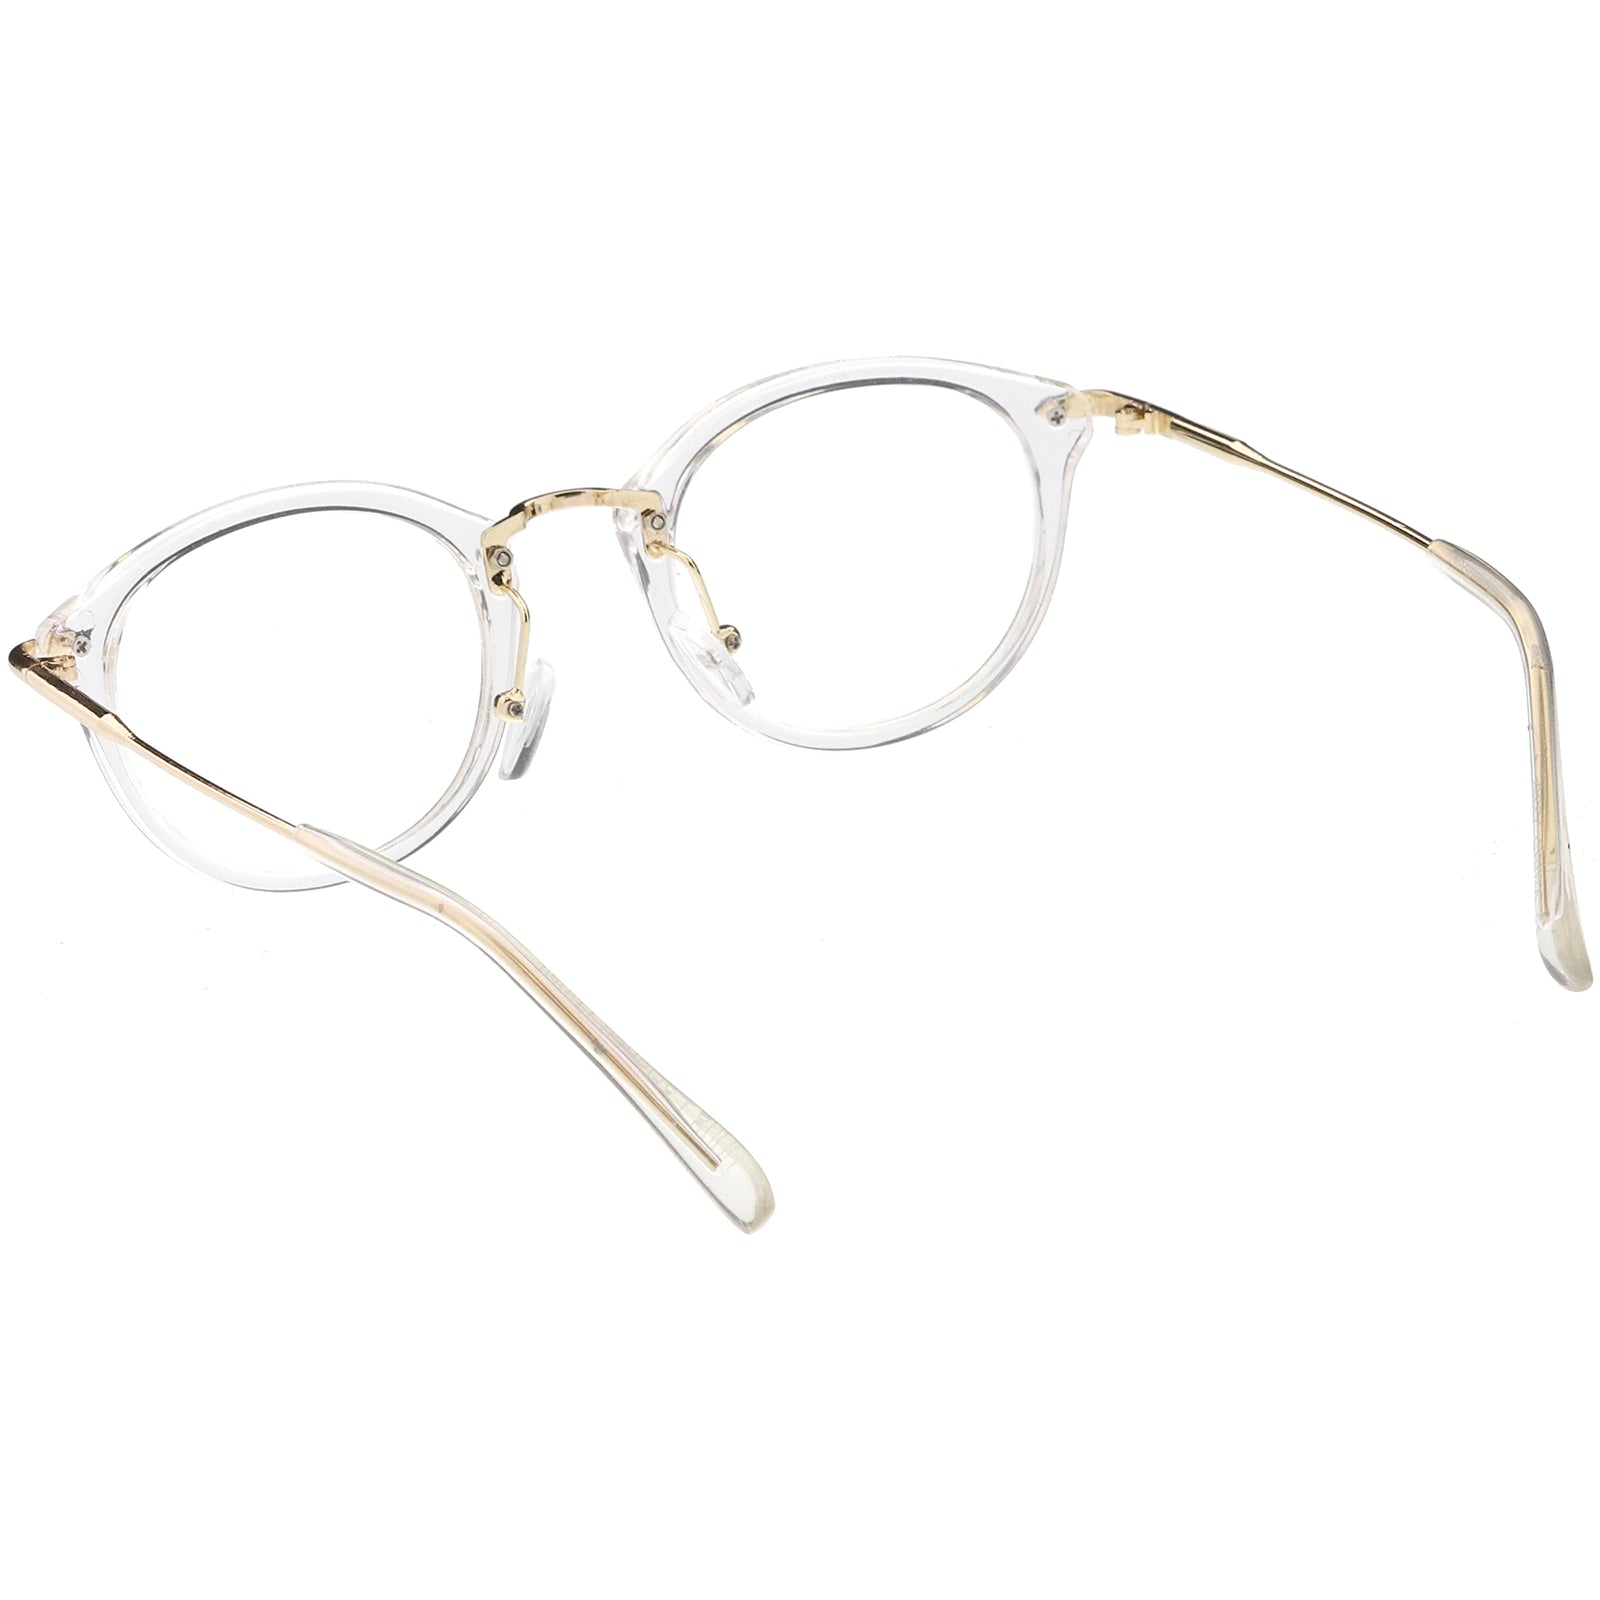 Classic Horn Rimmed Round Eyeglasses Thin Metal Arms Clear Lens 47mm 